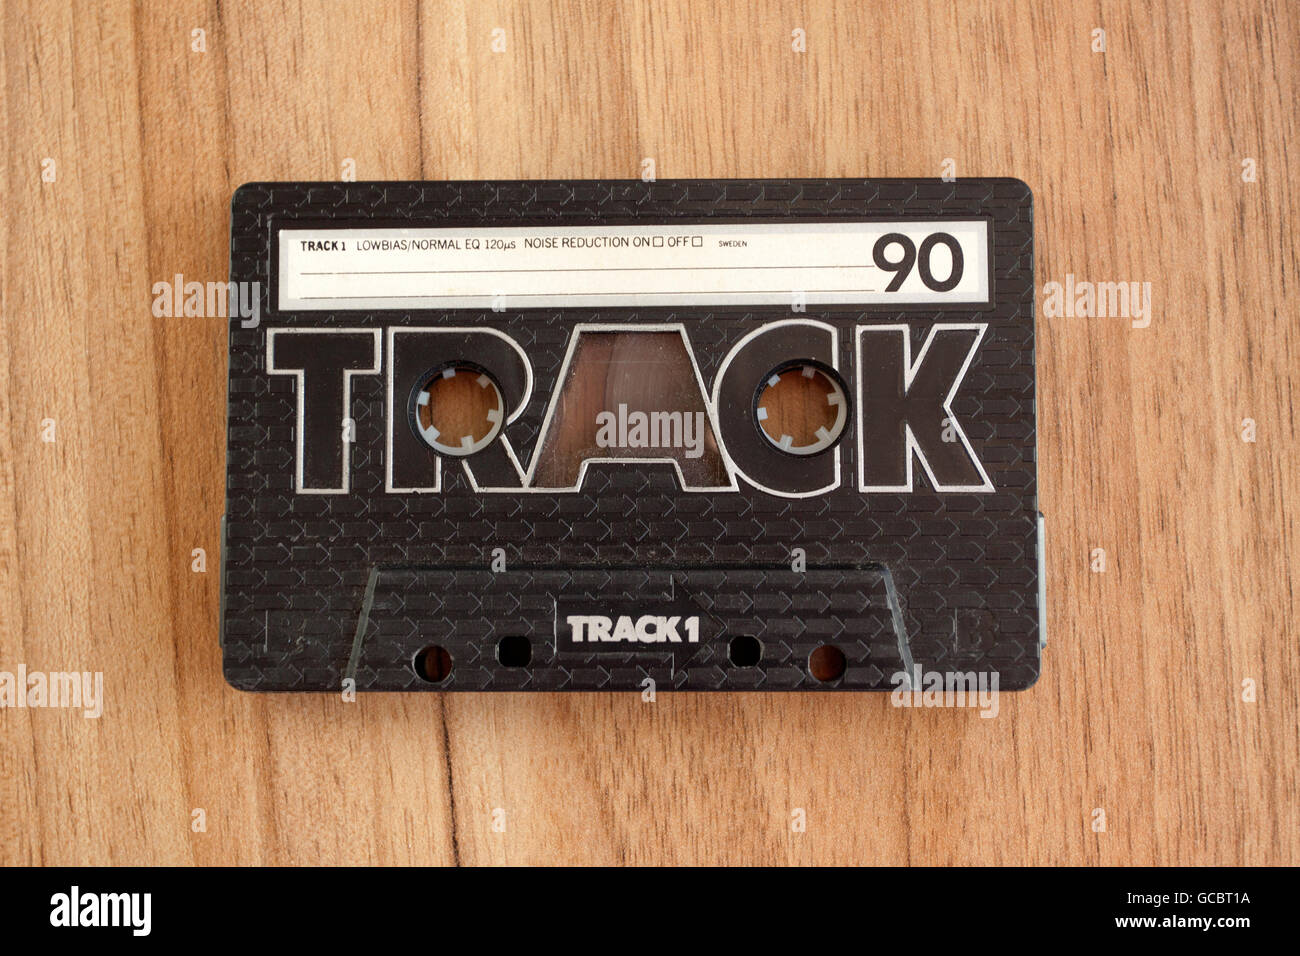 Vintage Cassette tape on wooden background, old technique. Stock Photo